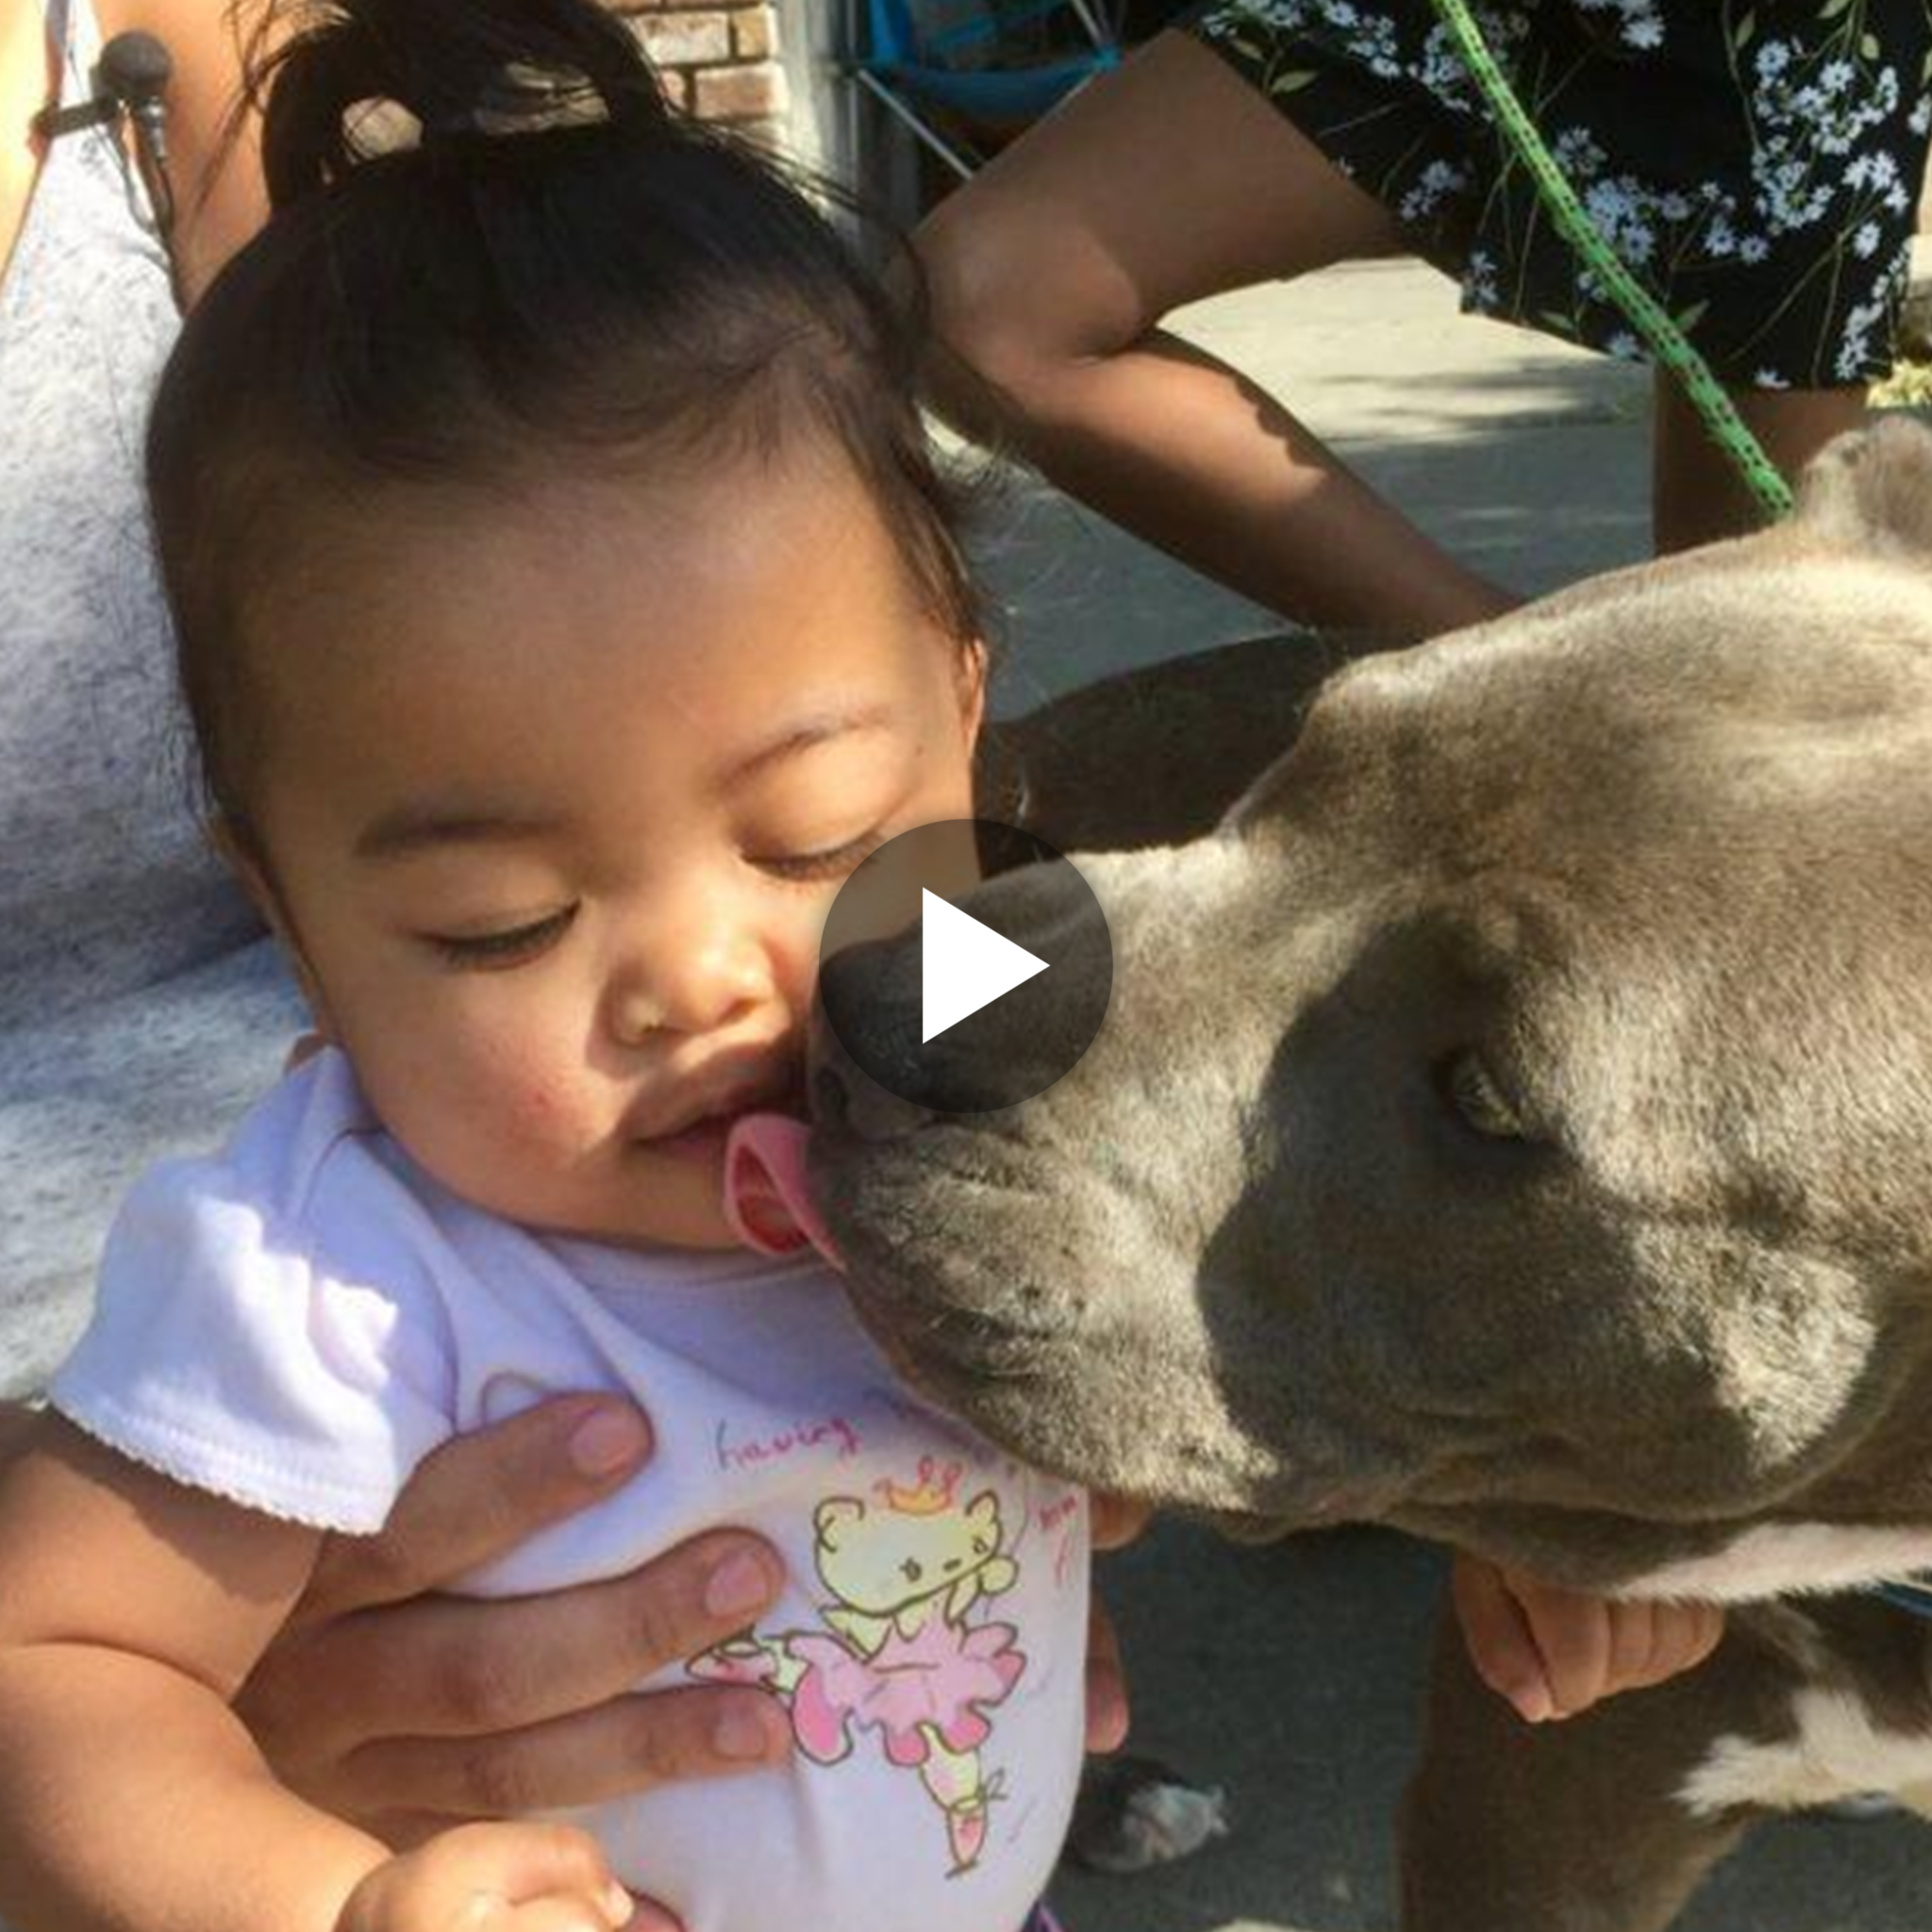 “4 legged Hero: The Brave Act of a Young Pit Bull Saving a Baby from a Devastating House Fire”